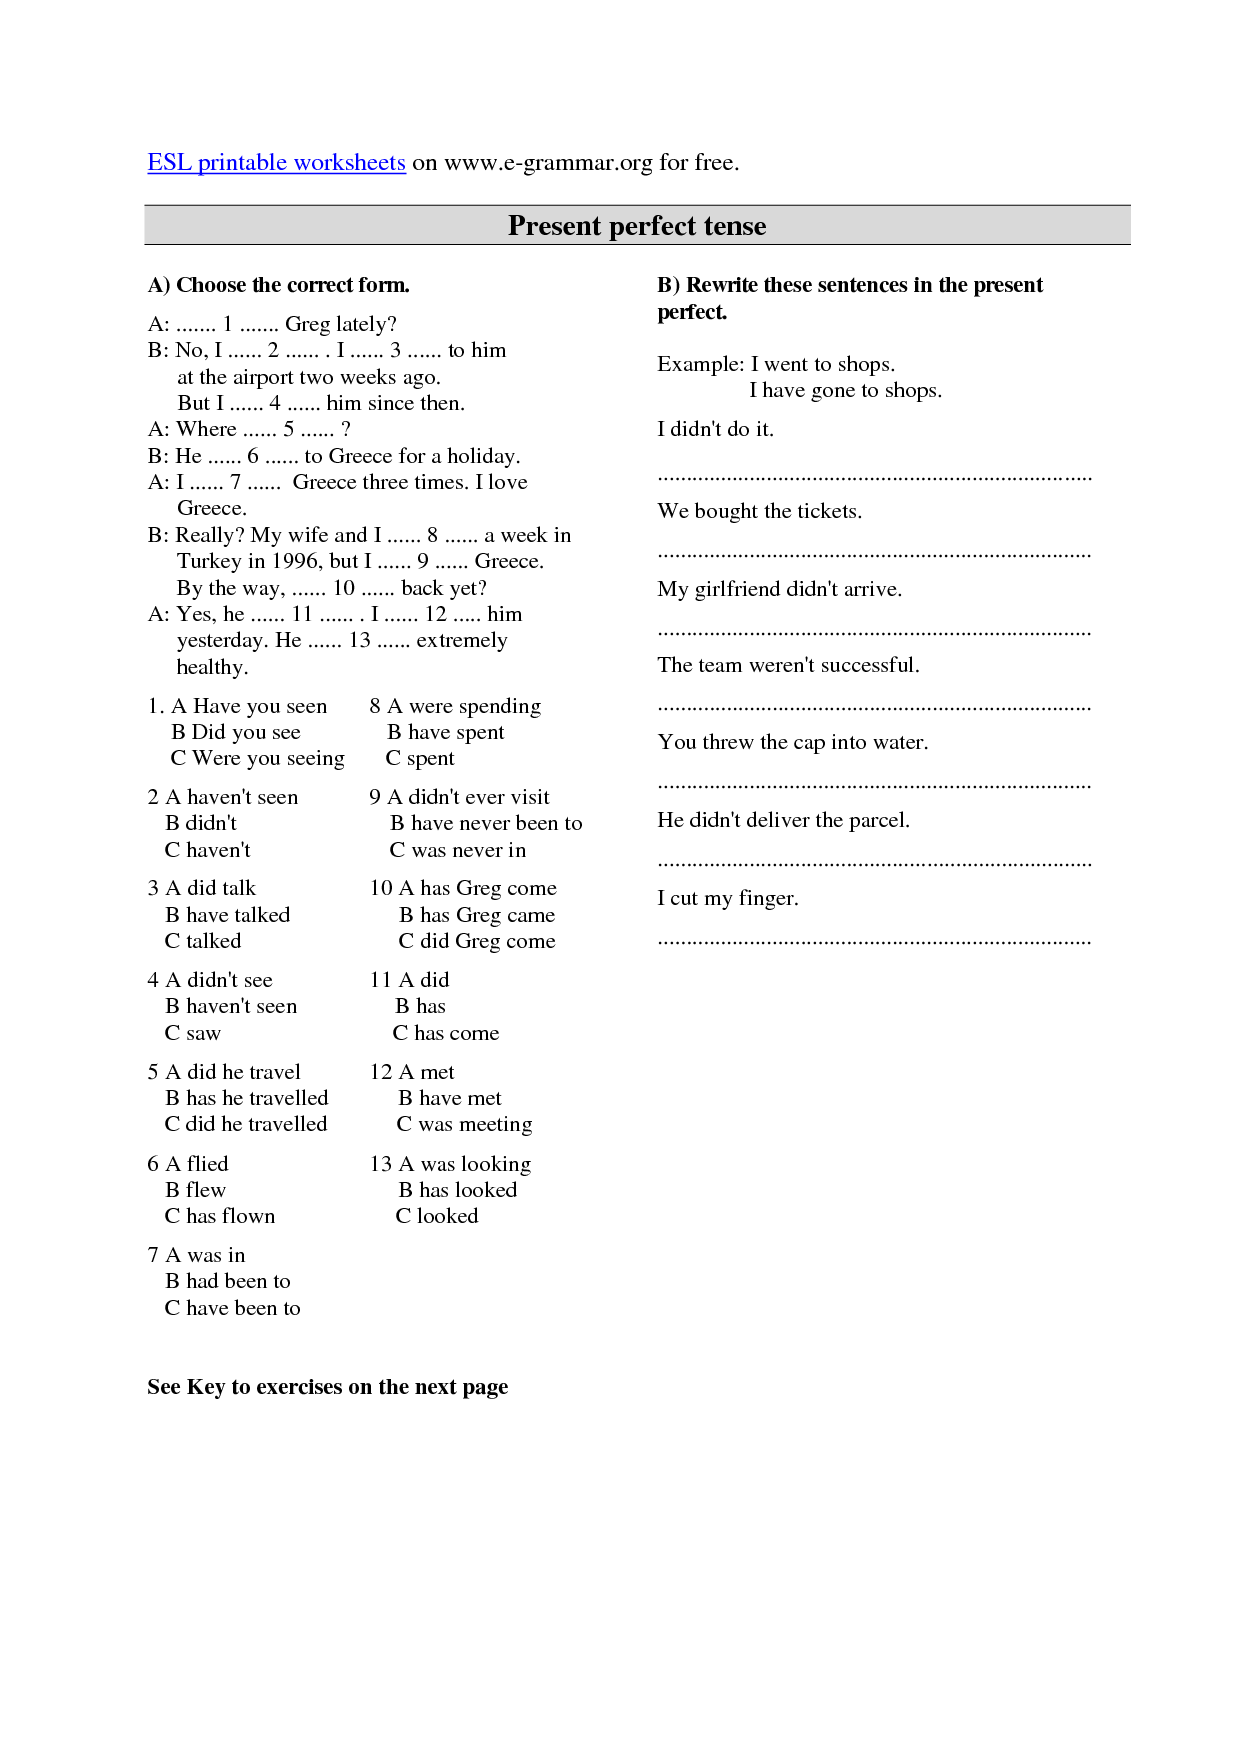 14 Best Images Of Spanish Present Tense Worksheets PDF Spanish Present Progressive Tense